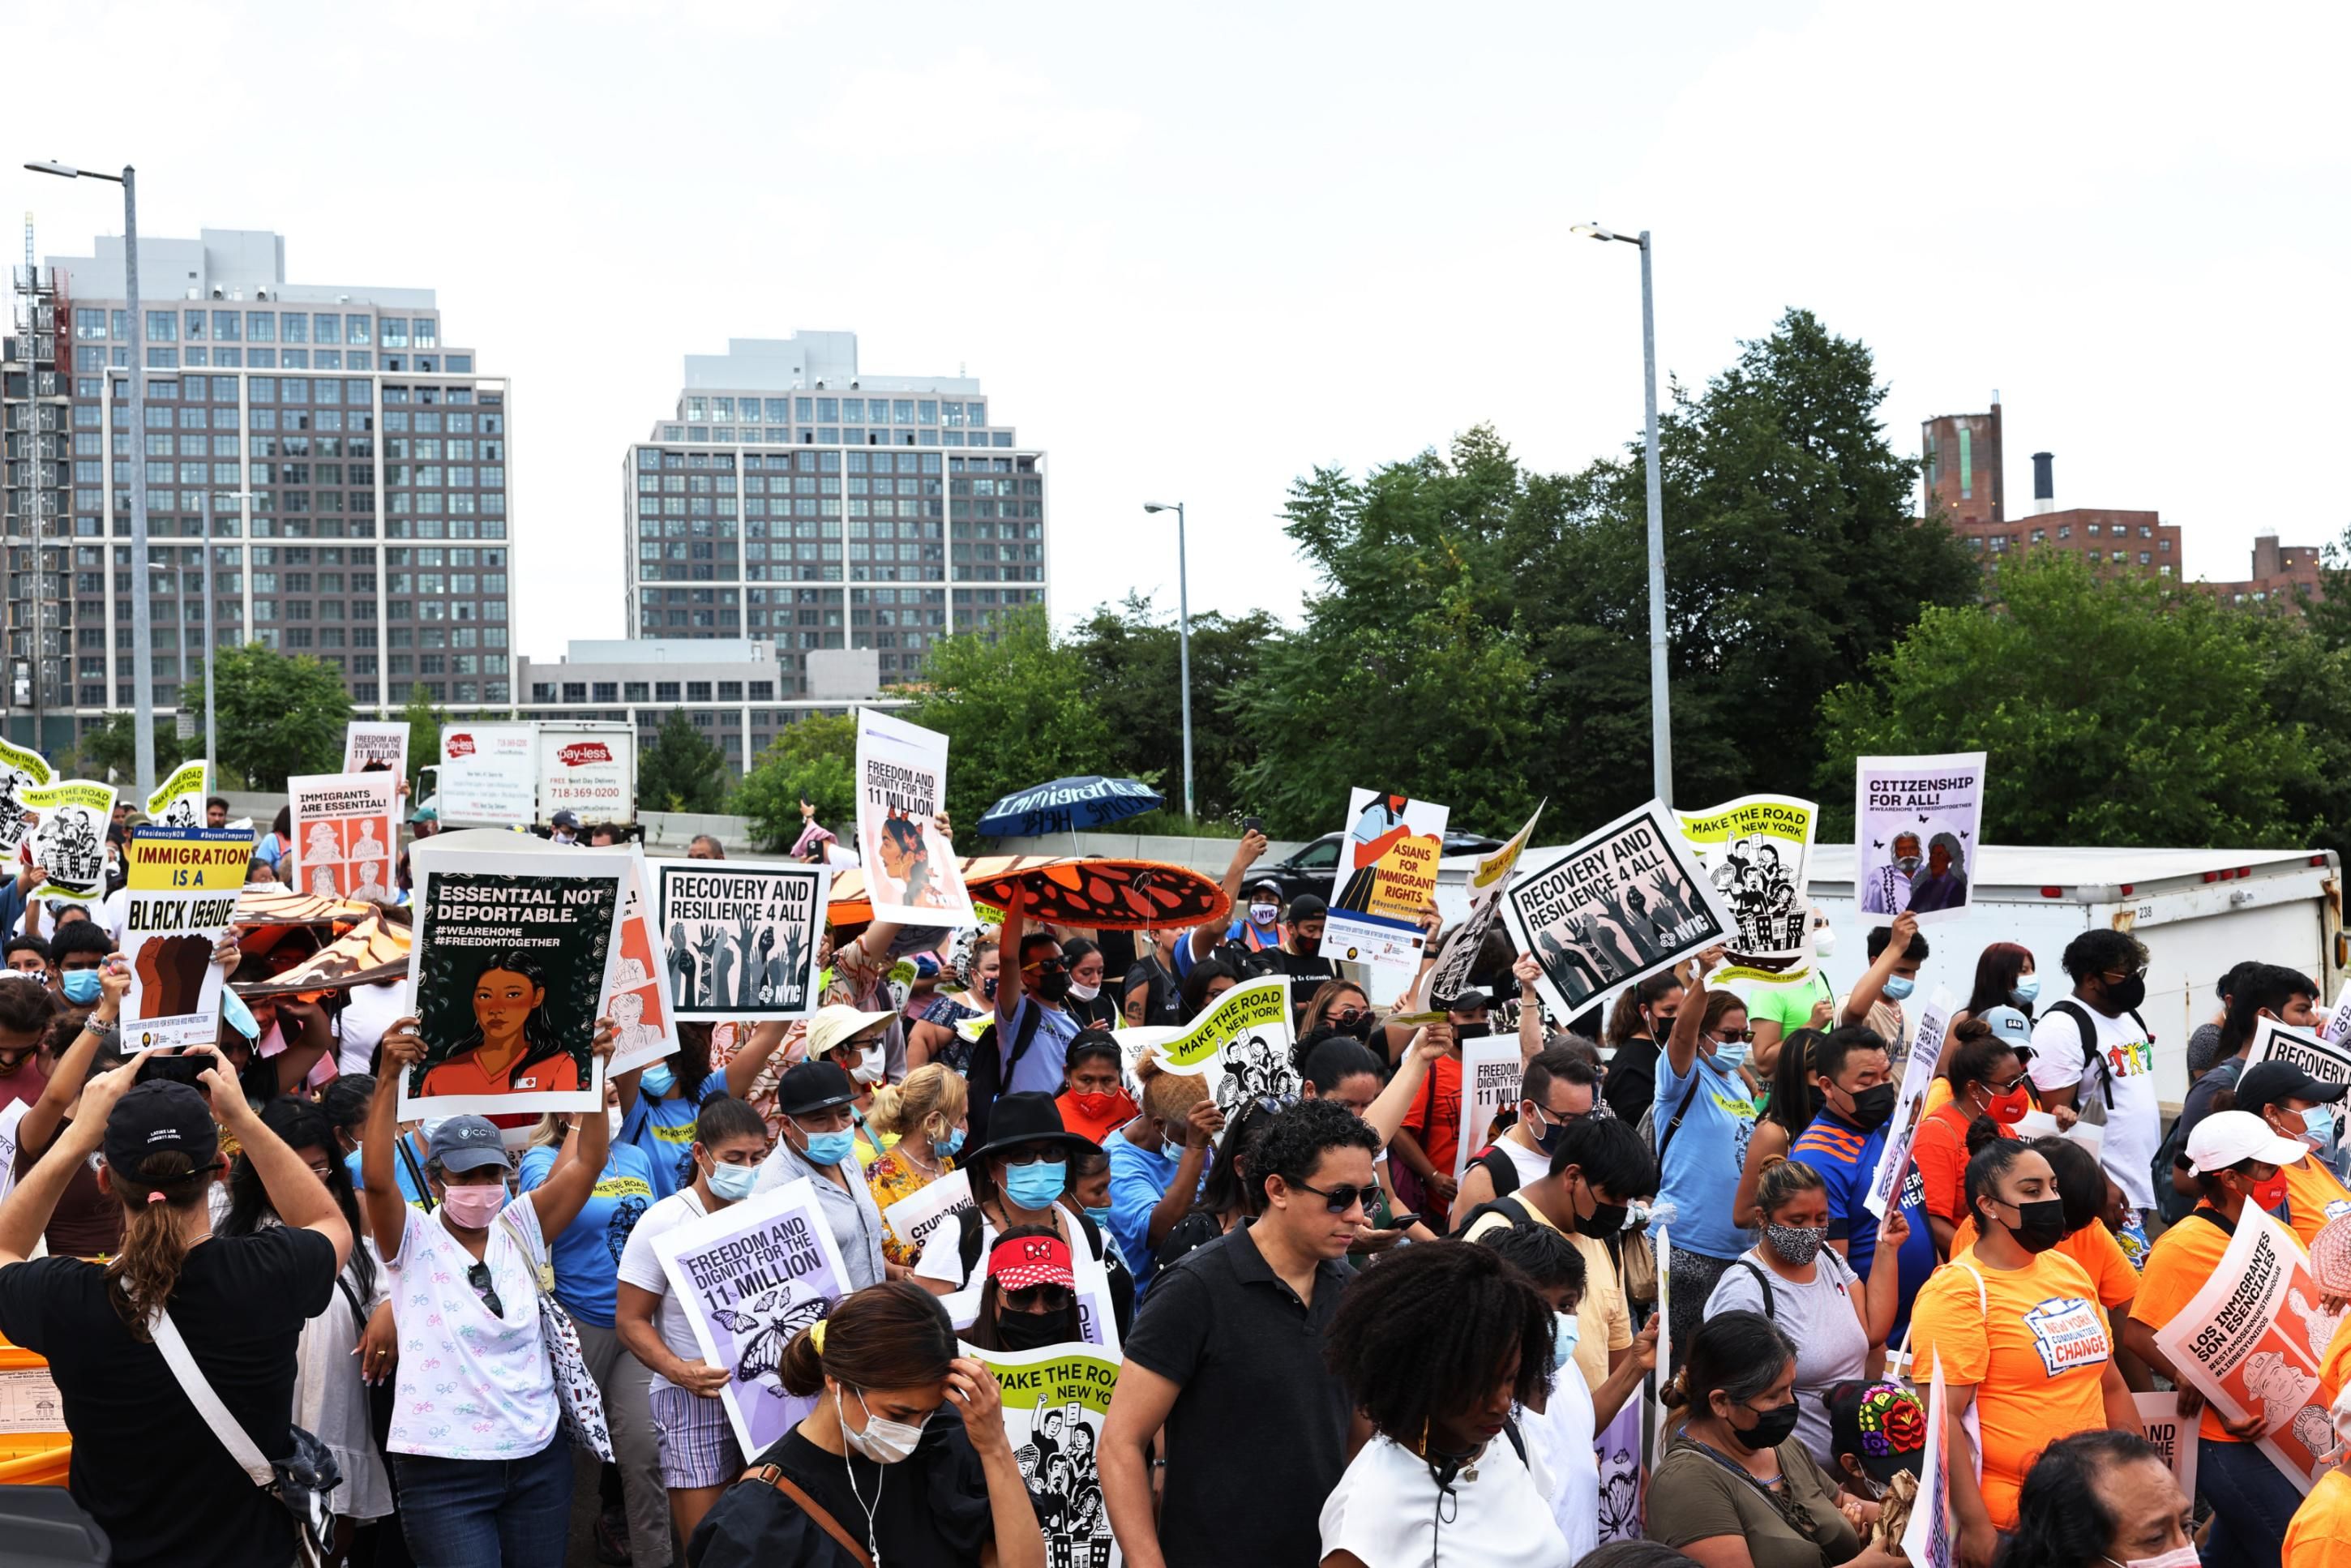 People march for a pathway to citizenship for immigrants on July 23, 2021 in New York City. (Photo: Michael M. Santiago via Getty Images)